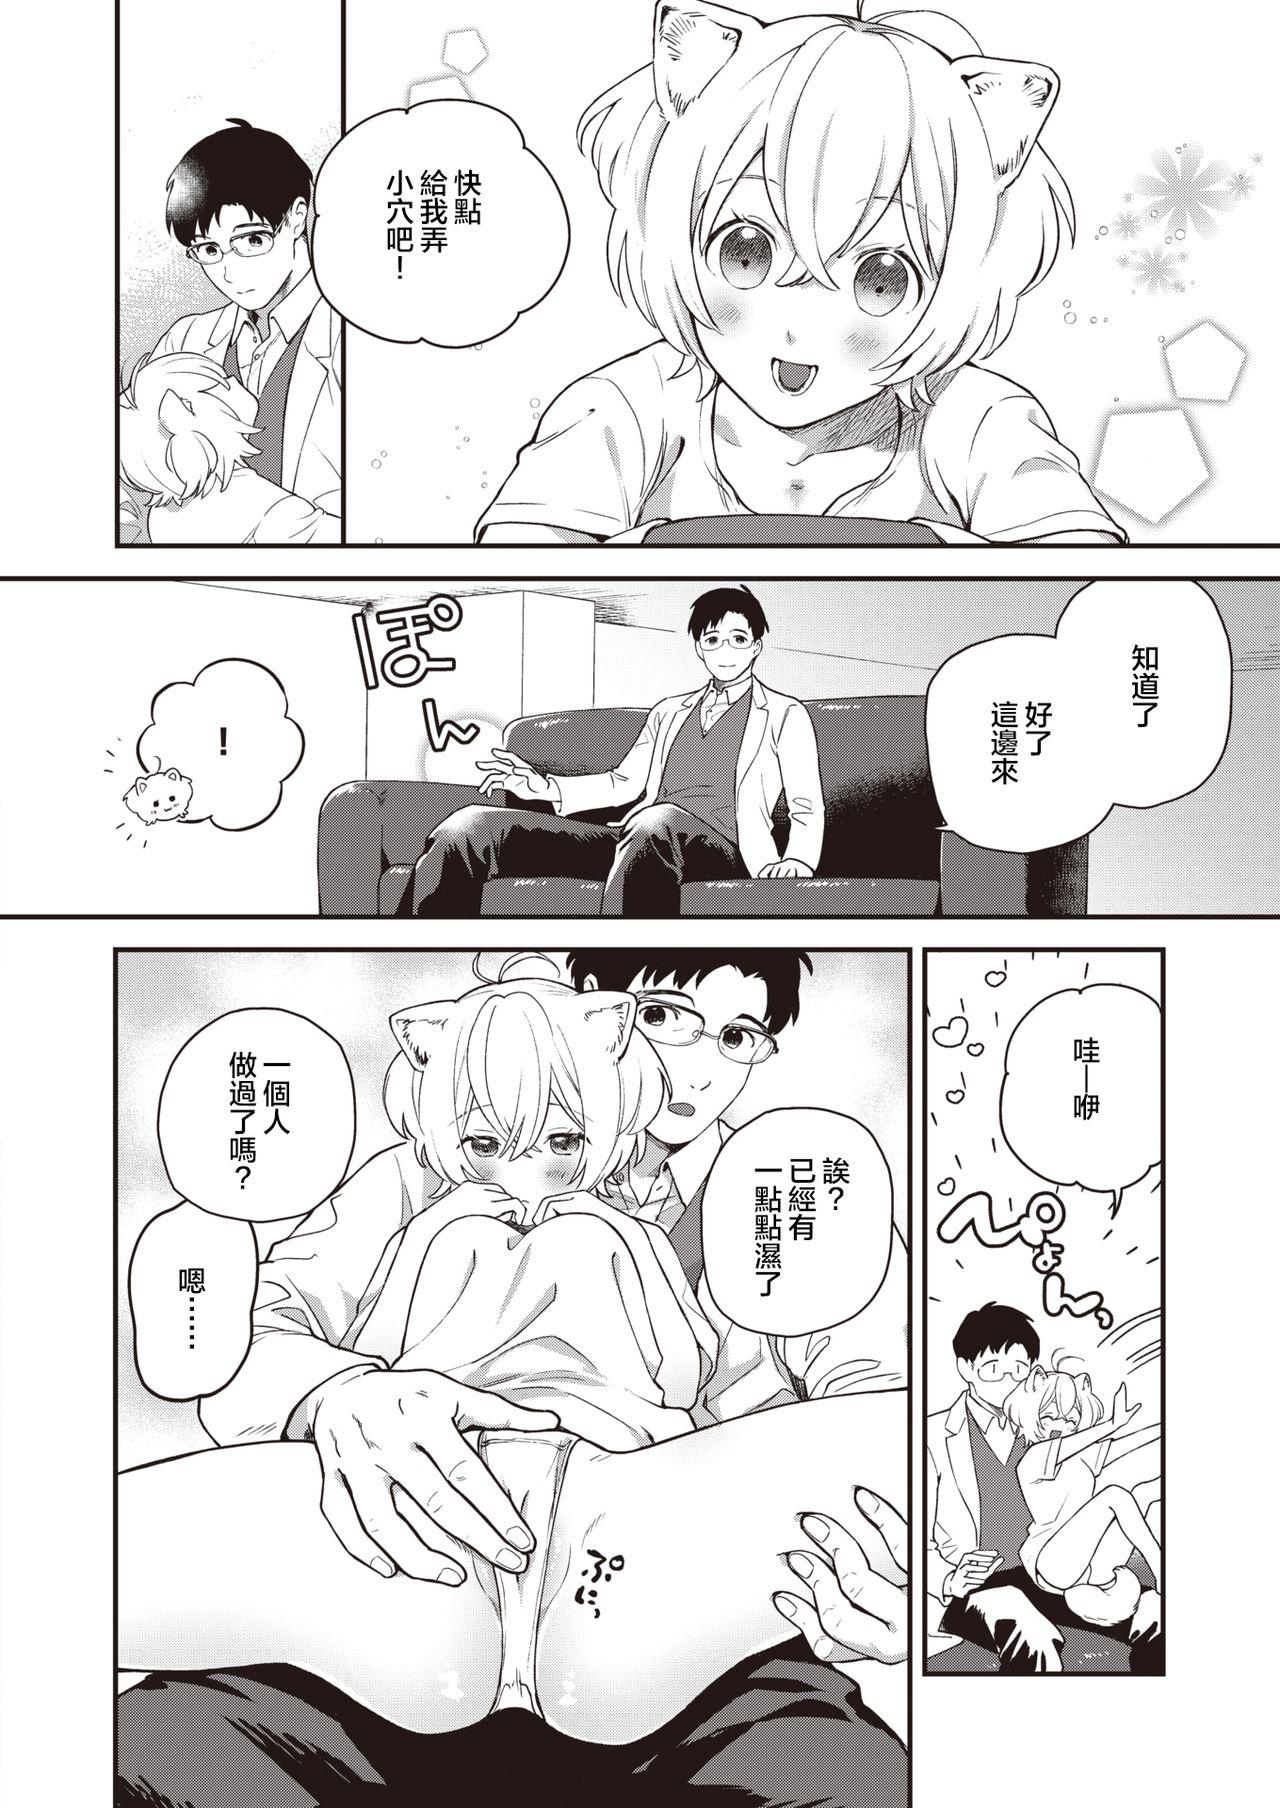 Tiny Girl Koinu no Londo | 小狗的回旋曲 Special Locations - Page 4